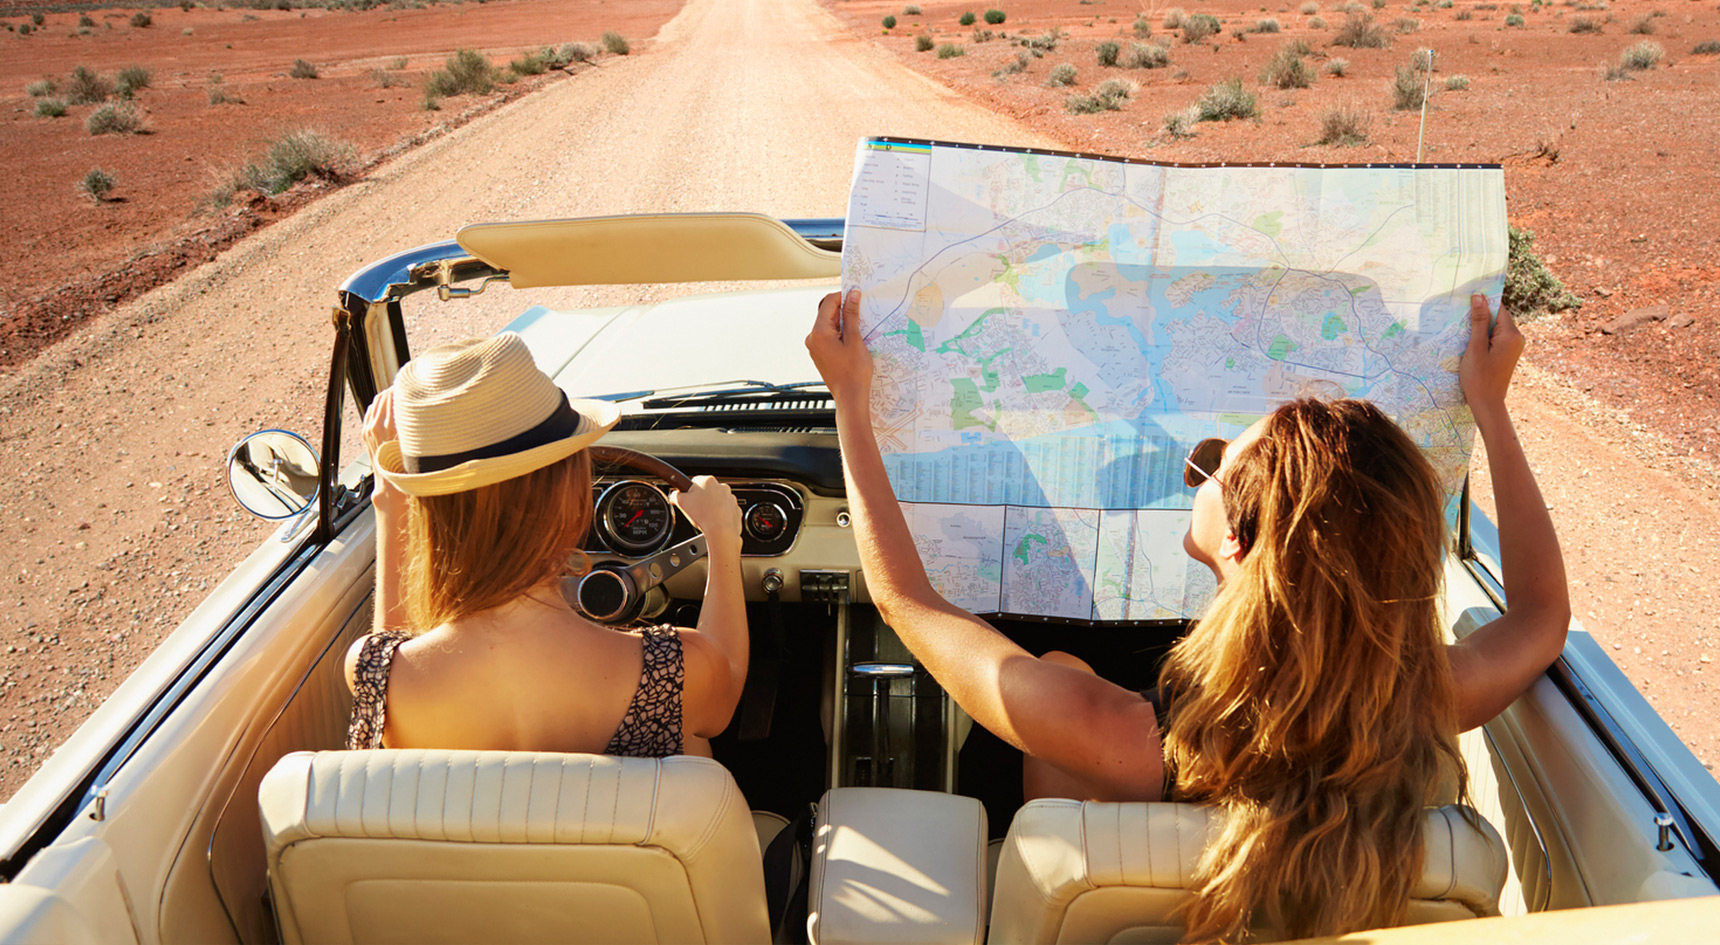 Two women driving on an open road, one holding a map